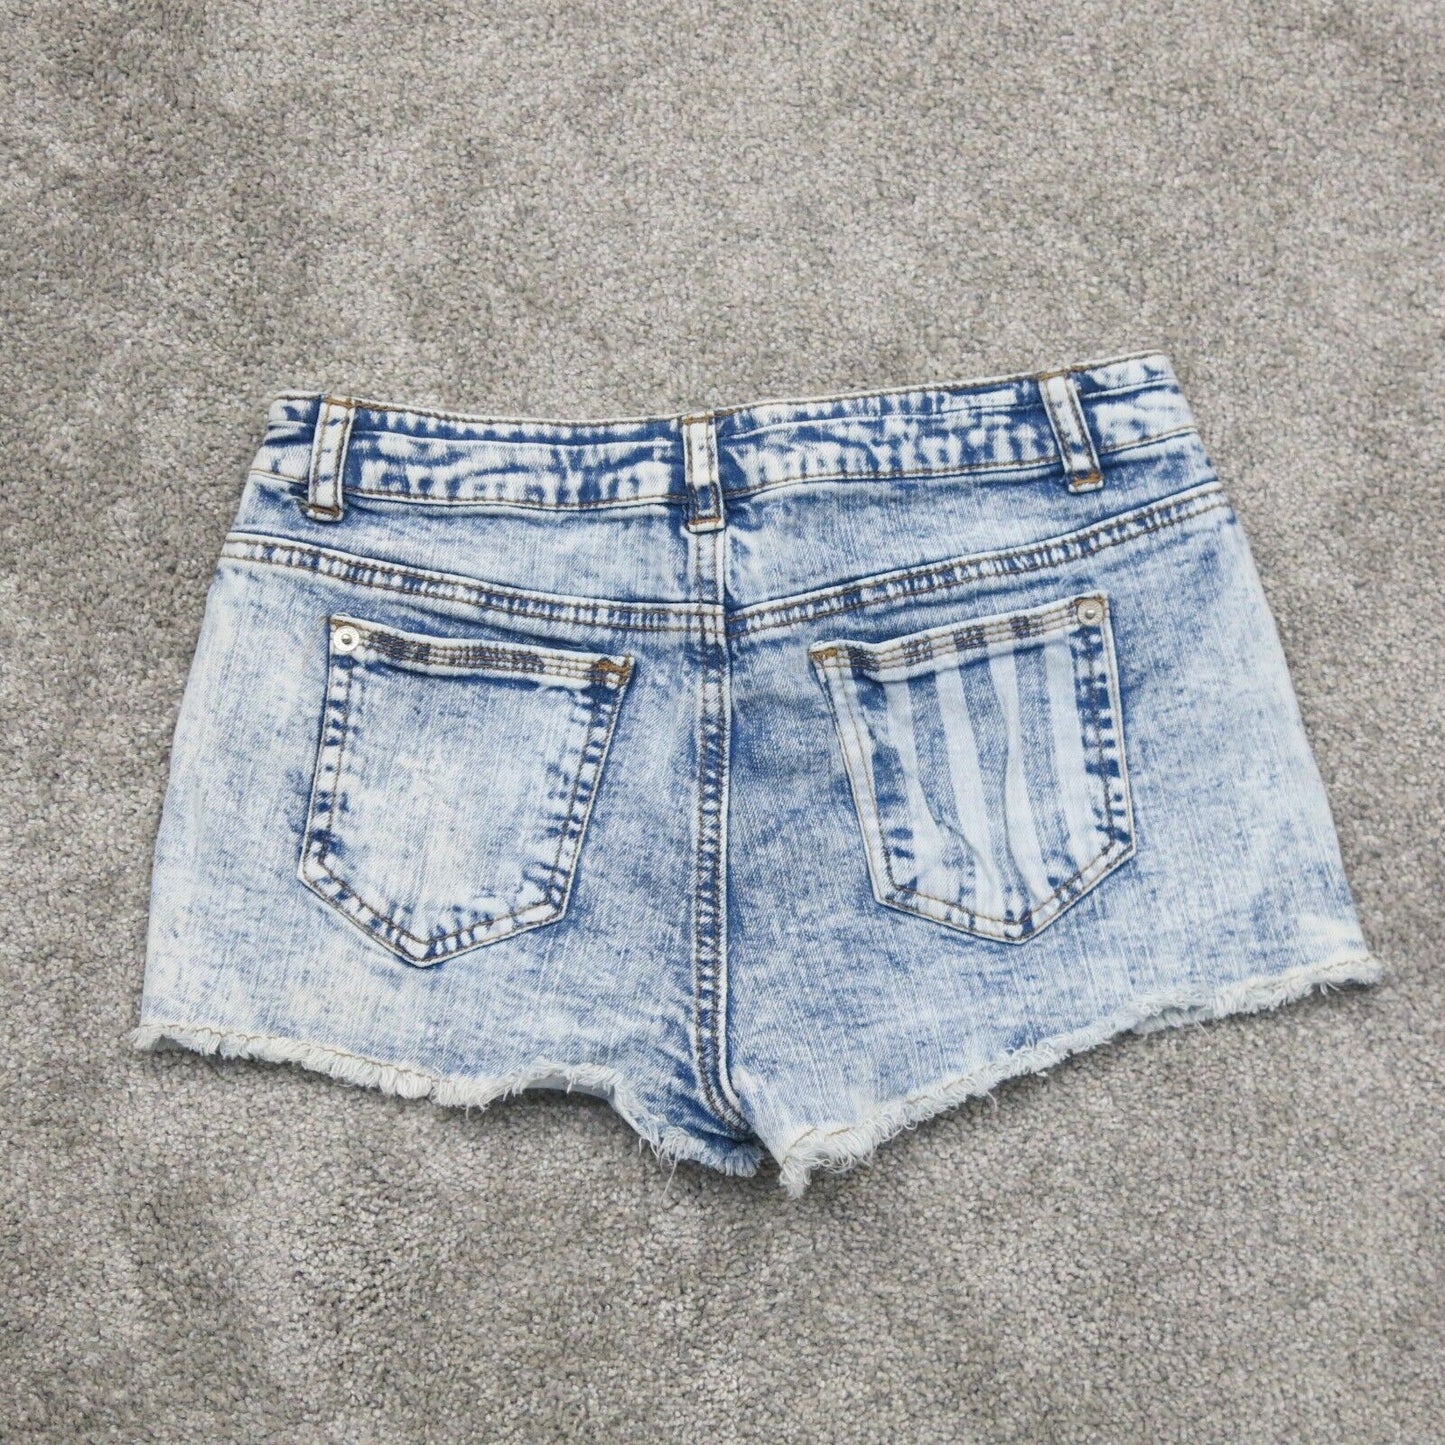 MOSSIMO Supply Women Cut-Off Jeans Shorts Denim High Rise TAILLE HAUTE Blue SZ 5